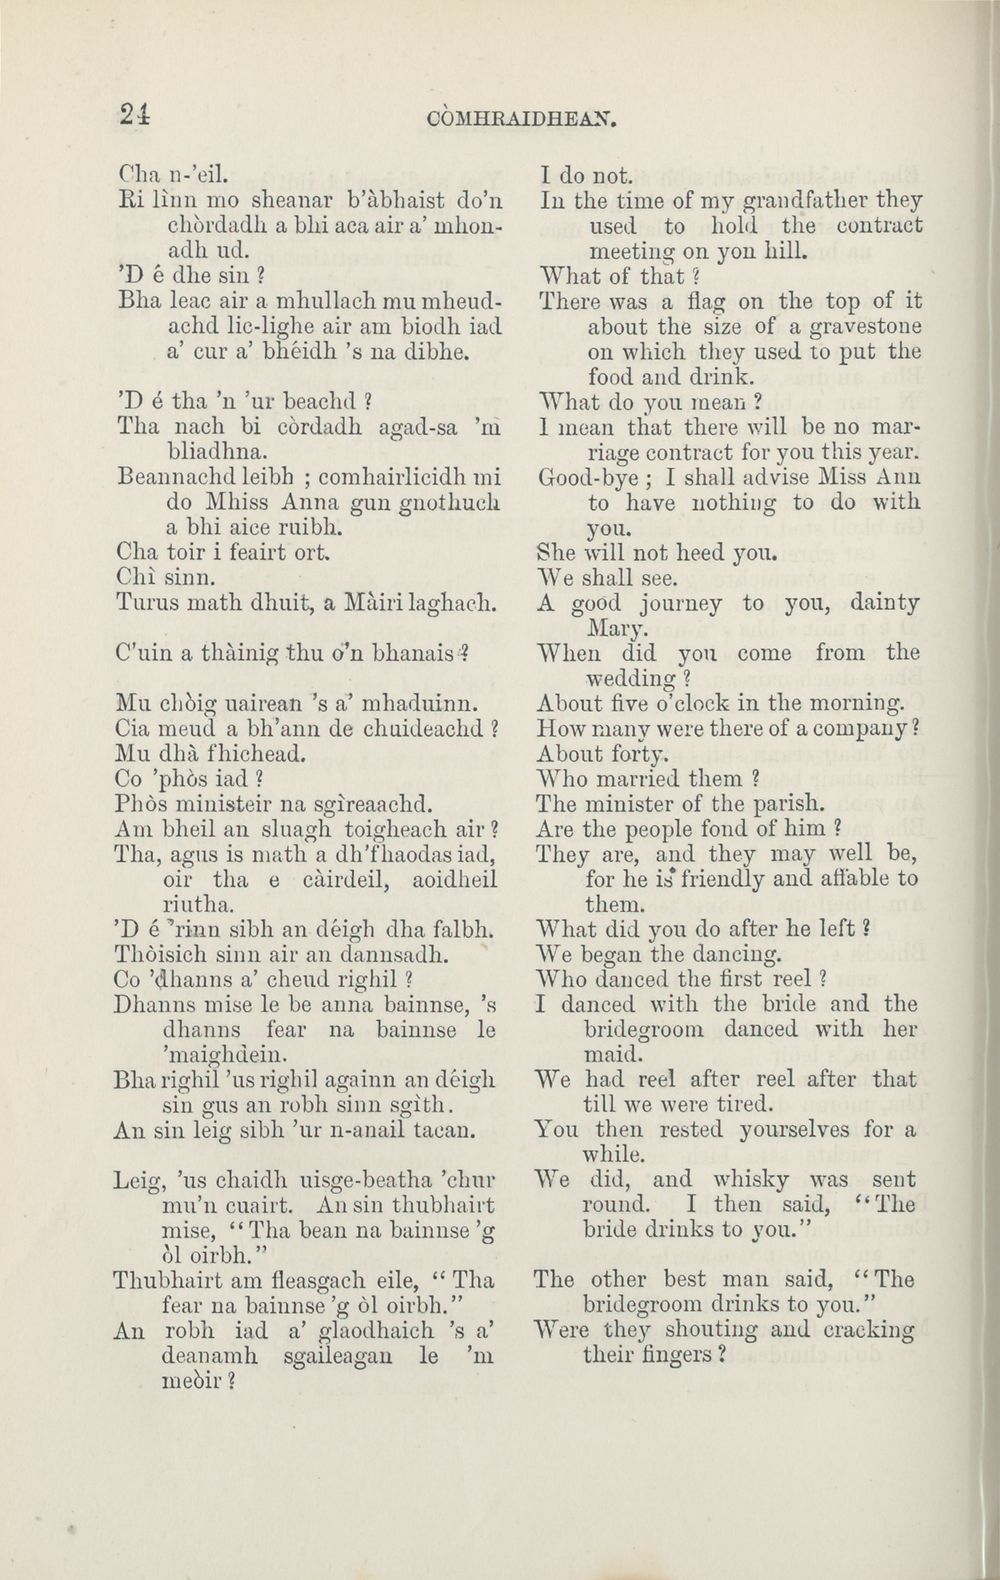 26 Page 24 Books And Other Items Printed In Gaelic From 1871 To 1900 Comhraidhean An Gaelig S Am Beurla Early Gaelic Book Collections National Library Of Scotland